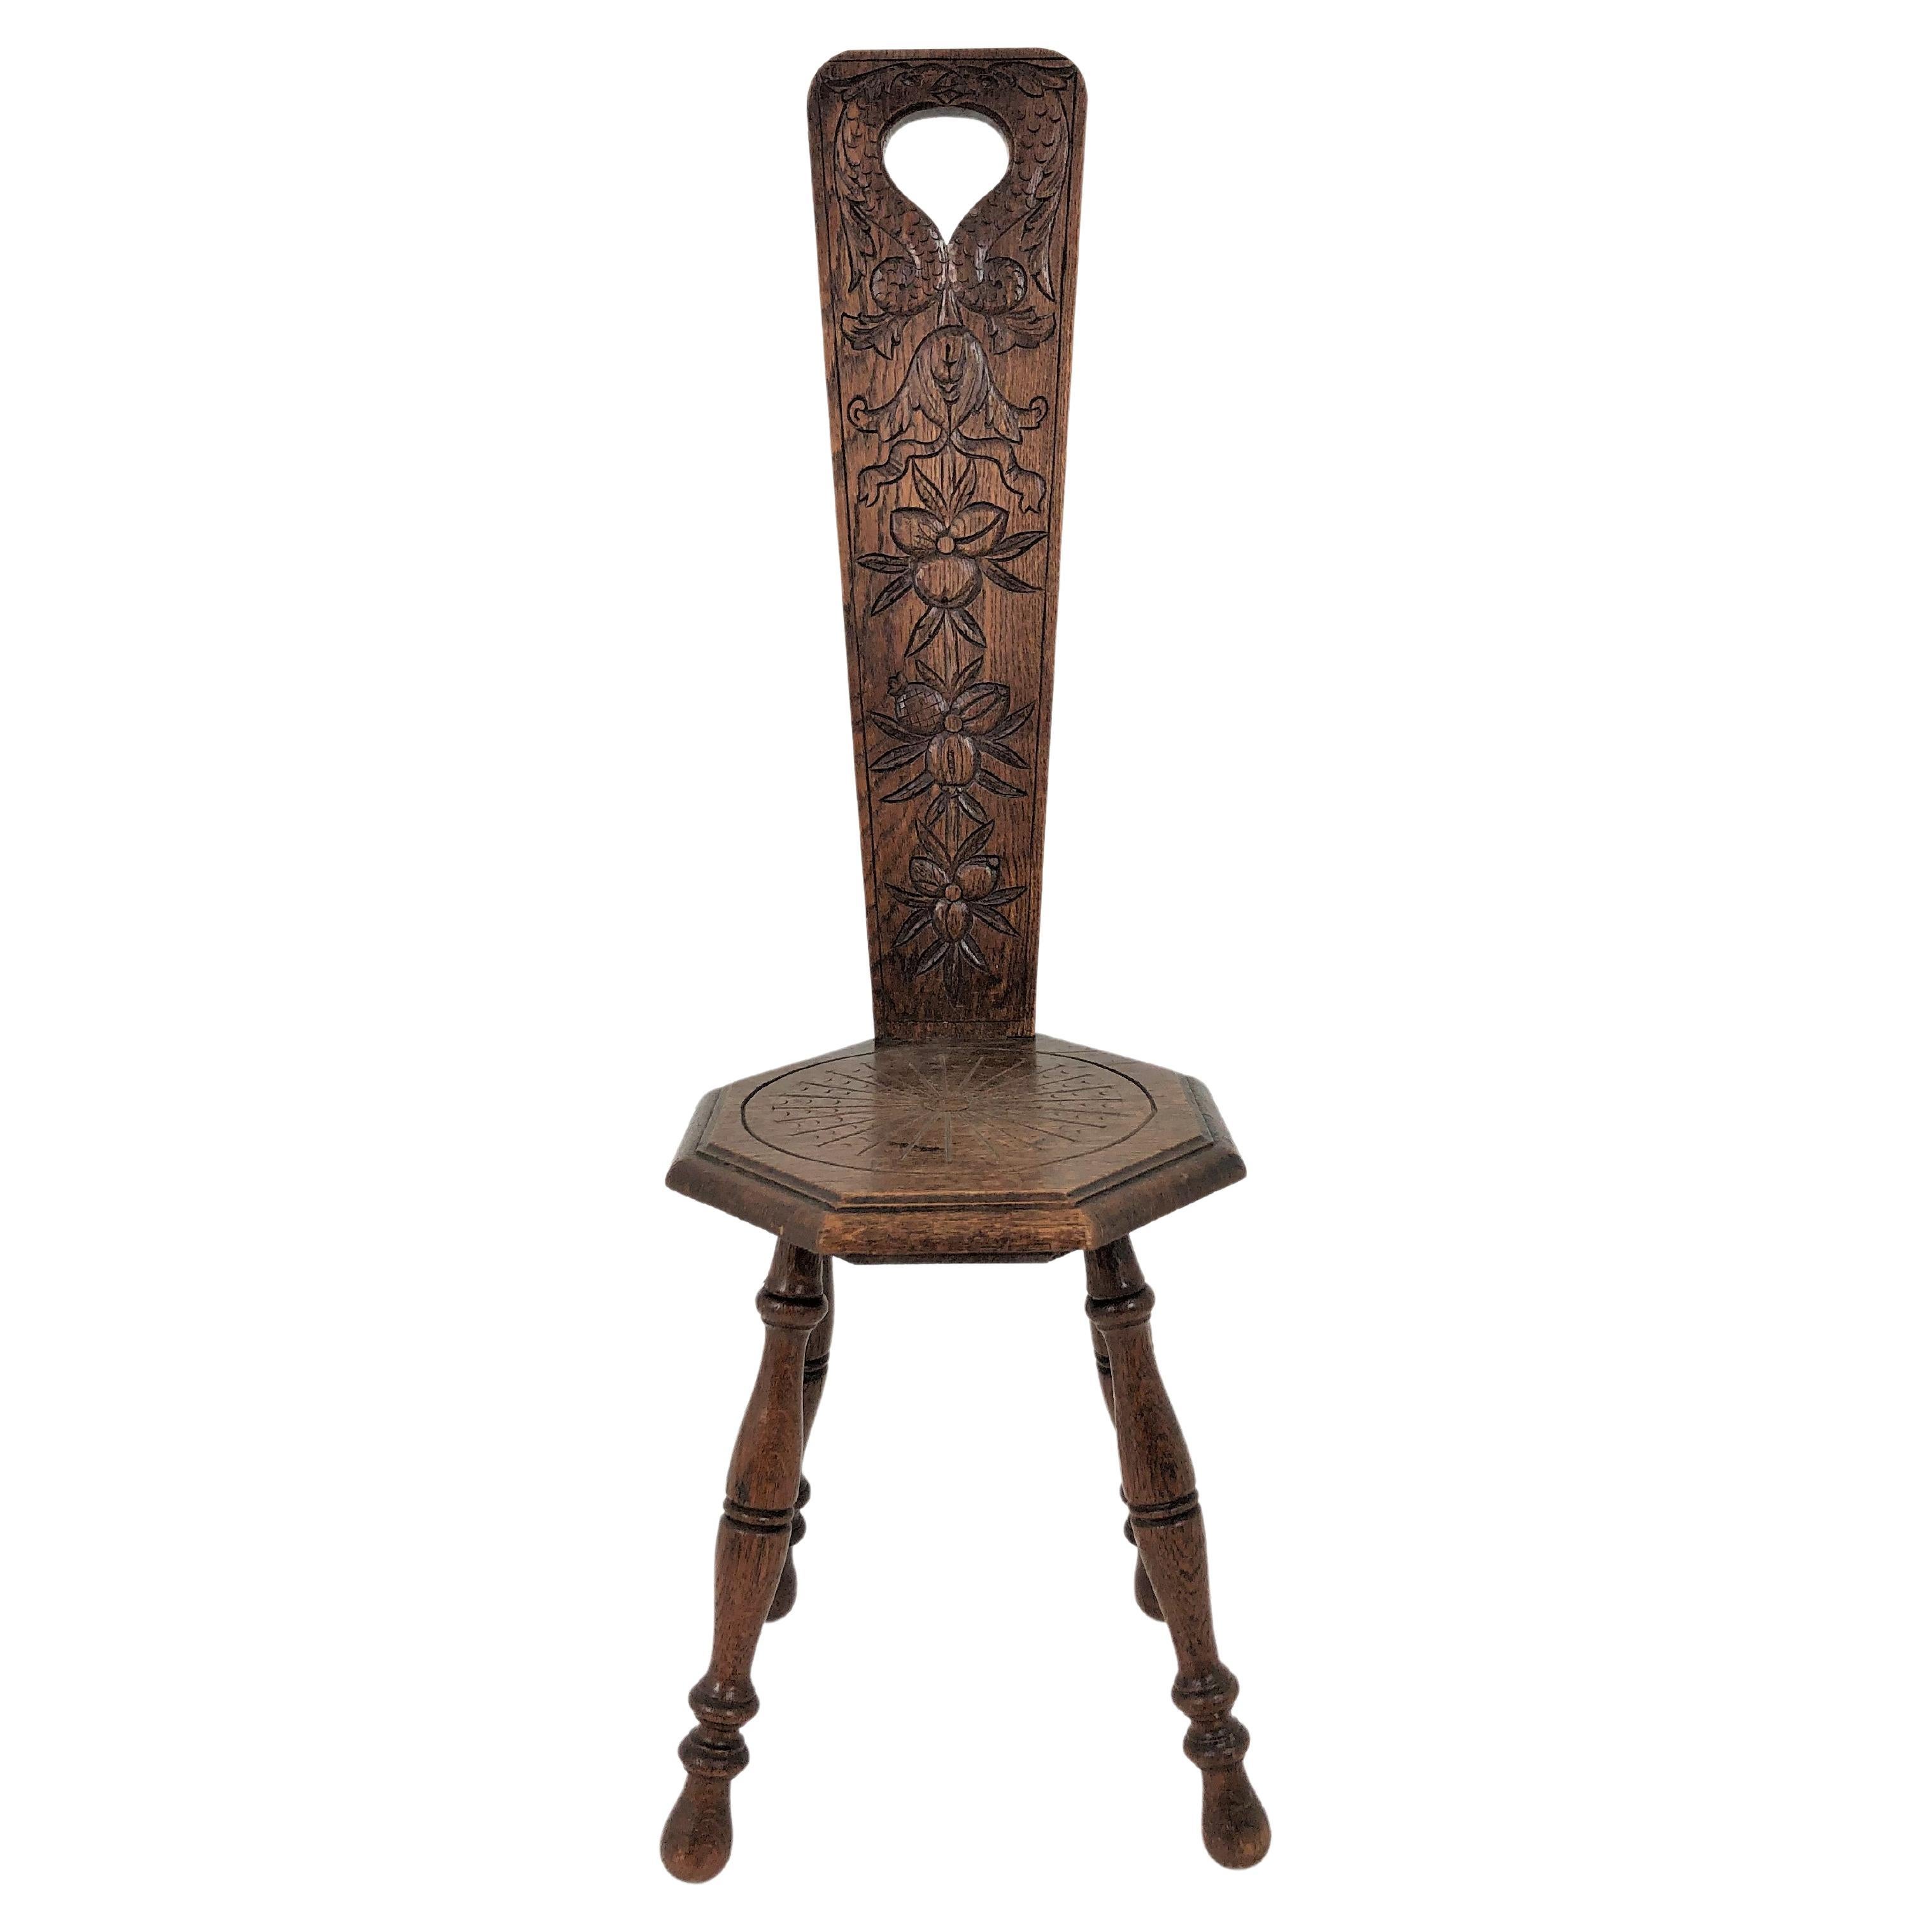 Antique Carved Oak Spinning Chair, Plant Stand, Scotland 1890, H711